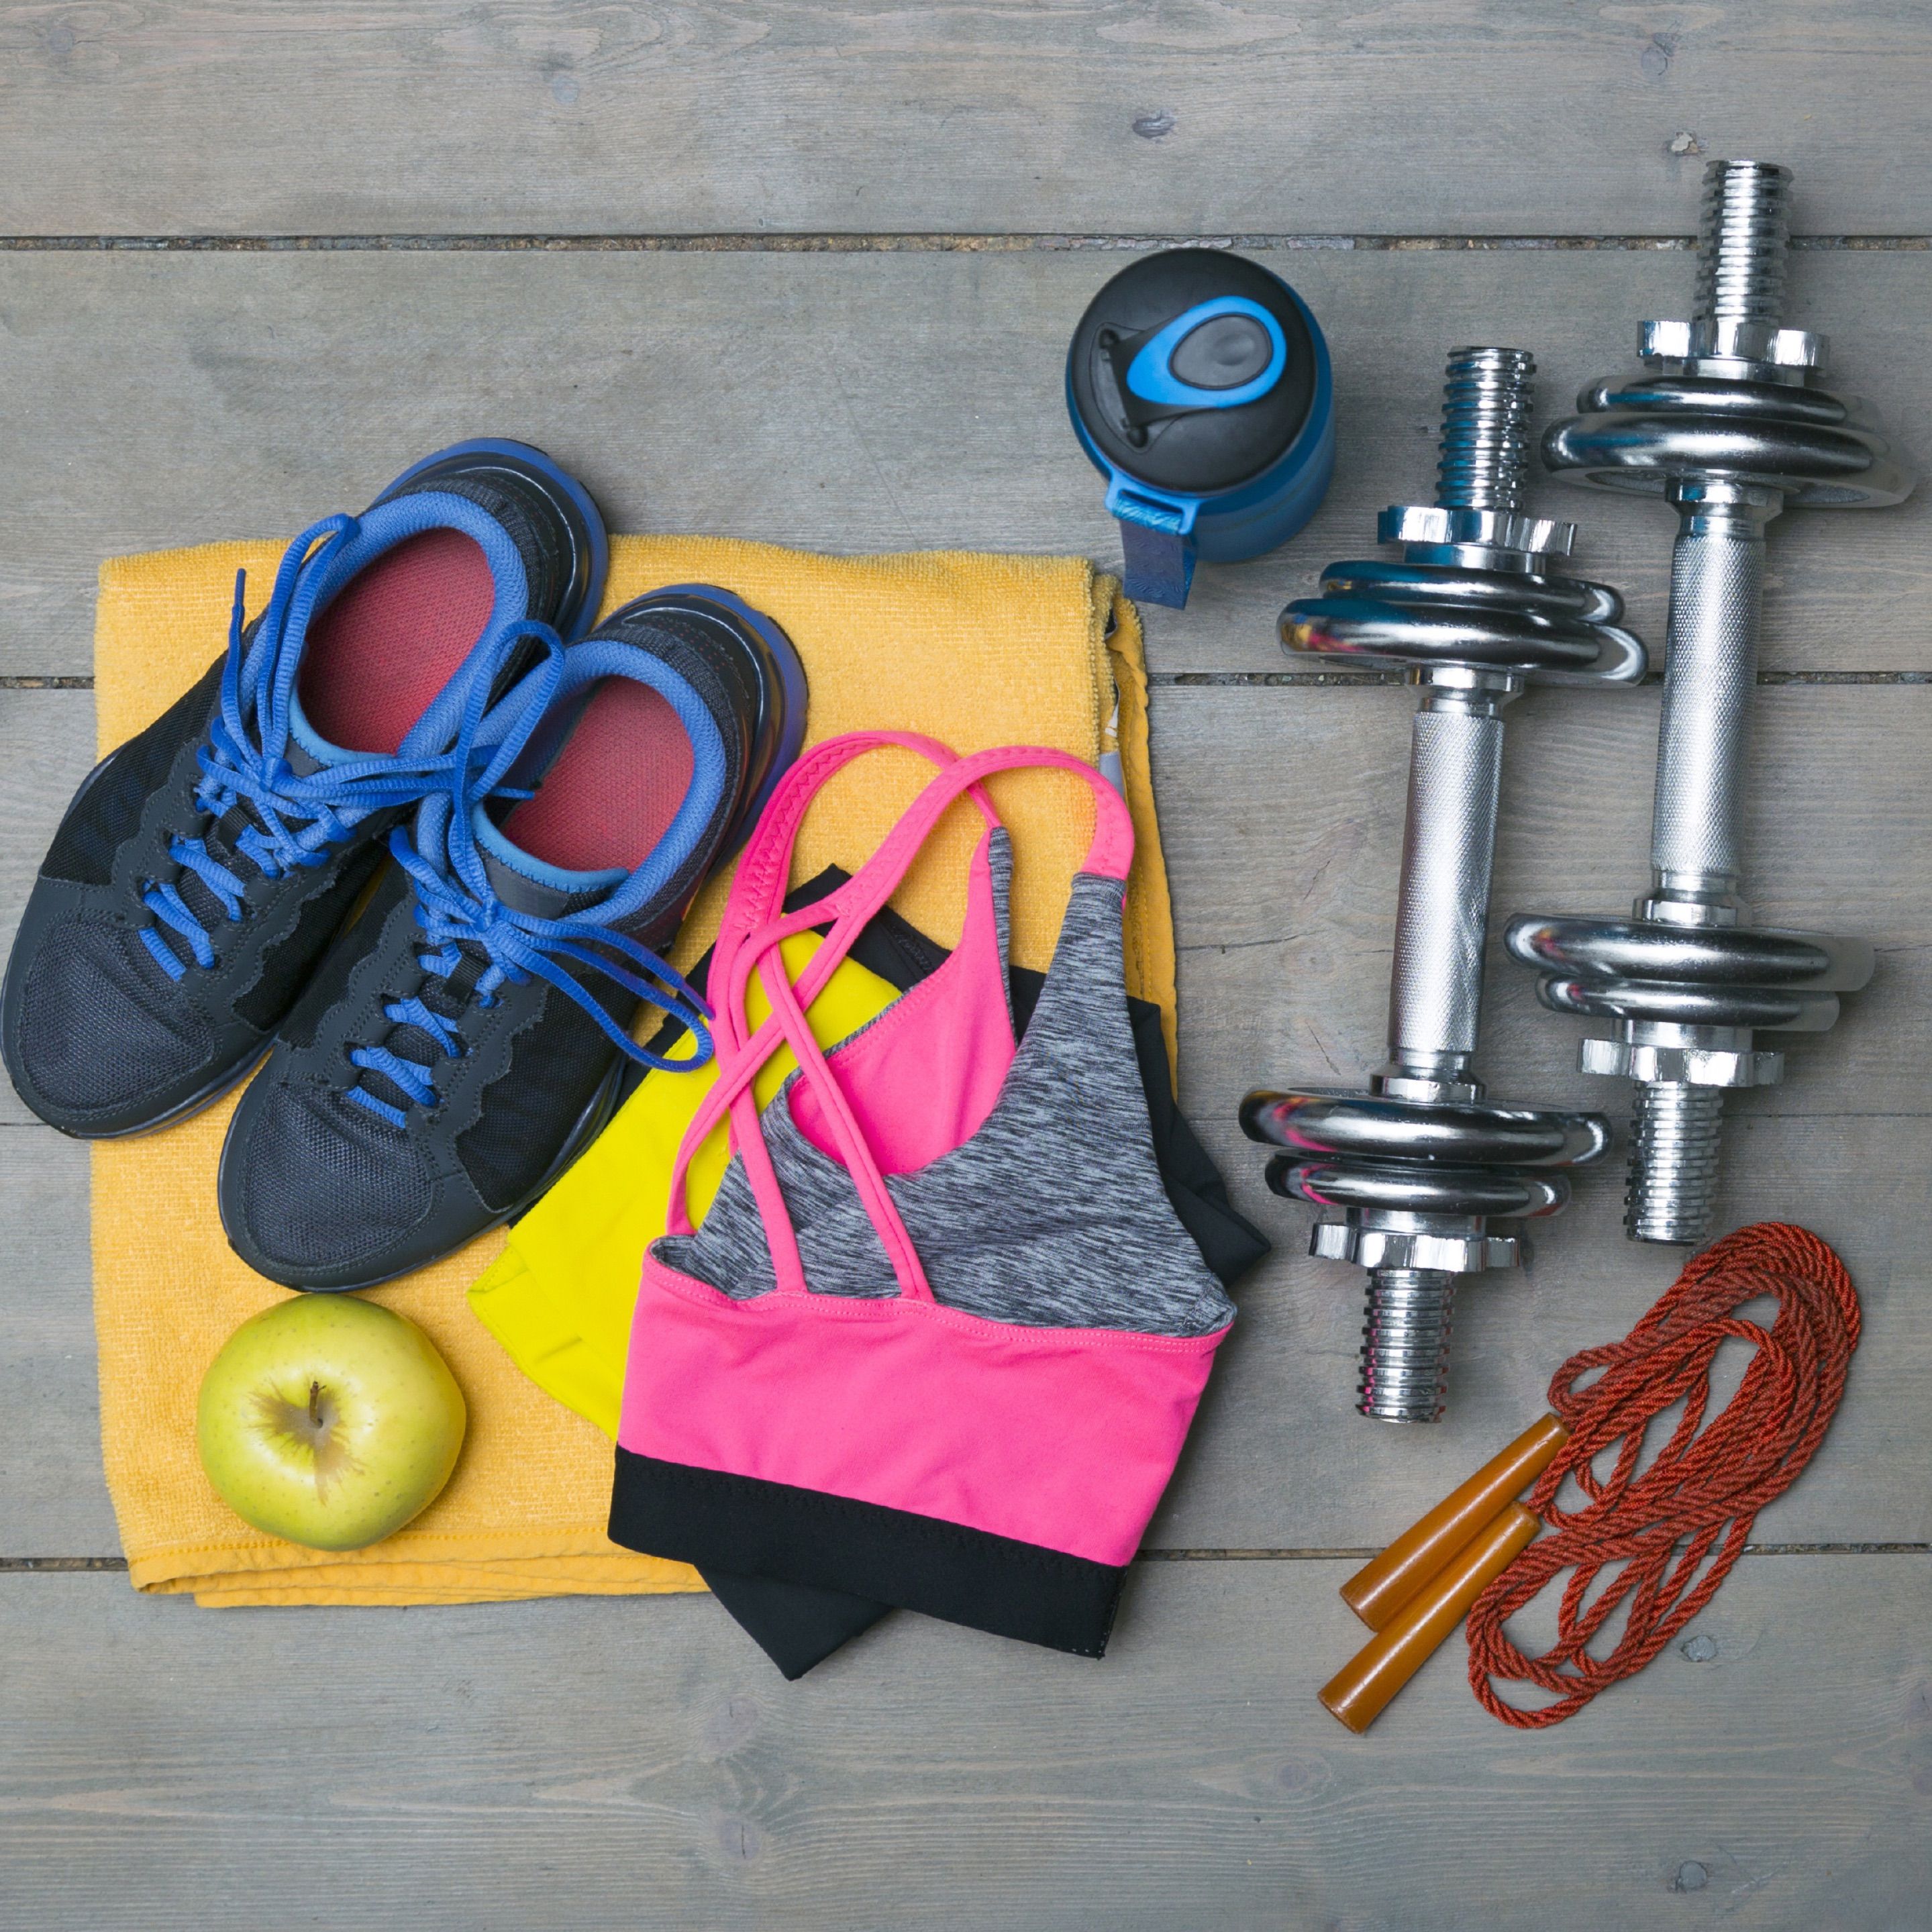 Tips for Beginning an Exercise Routine